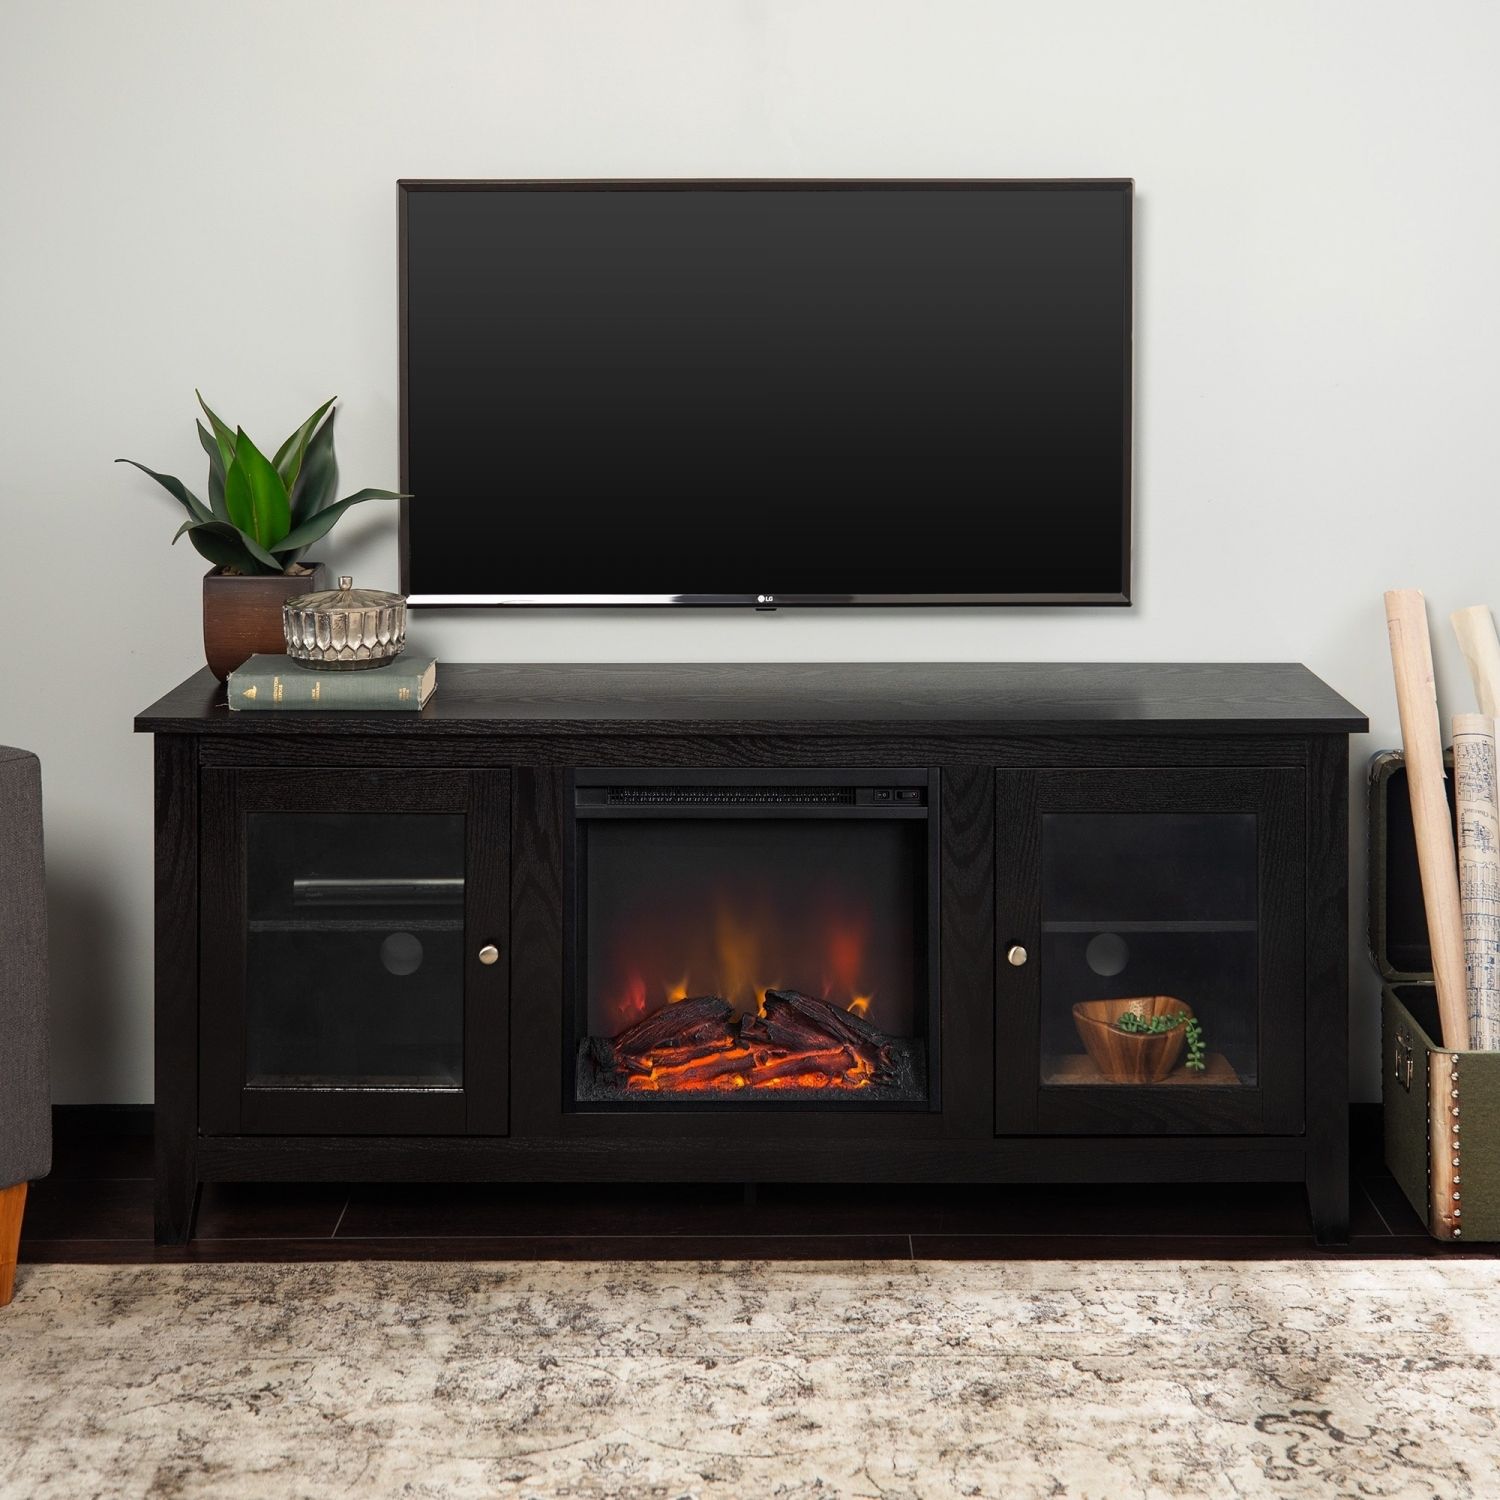 58 In Fireplace Tv Stand Console – Black | Ebay Pertaining To Fireplace Media Console Tv Stands With Weathered Finish (View 3 of 15)